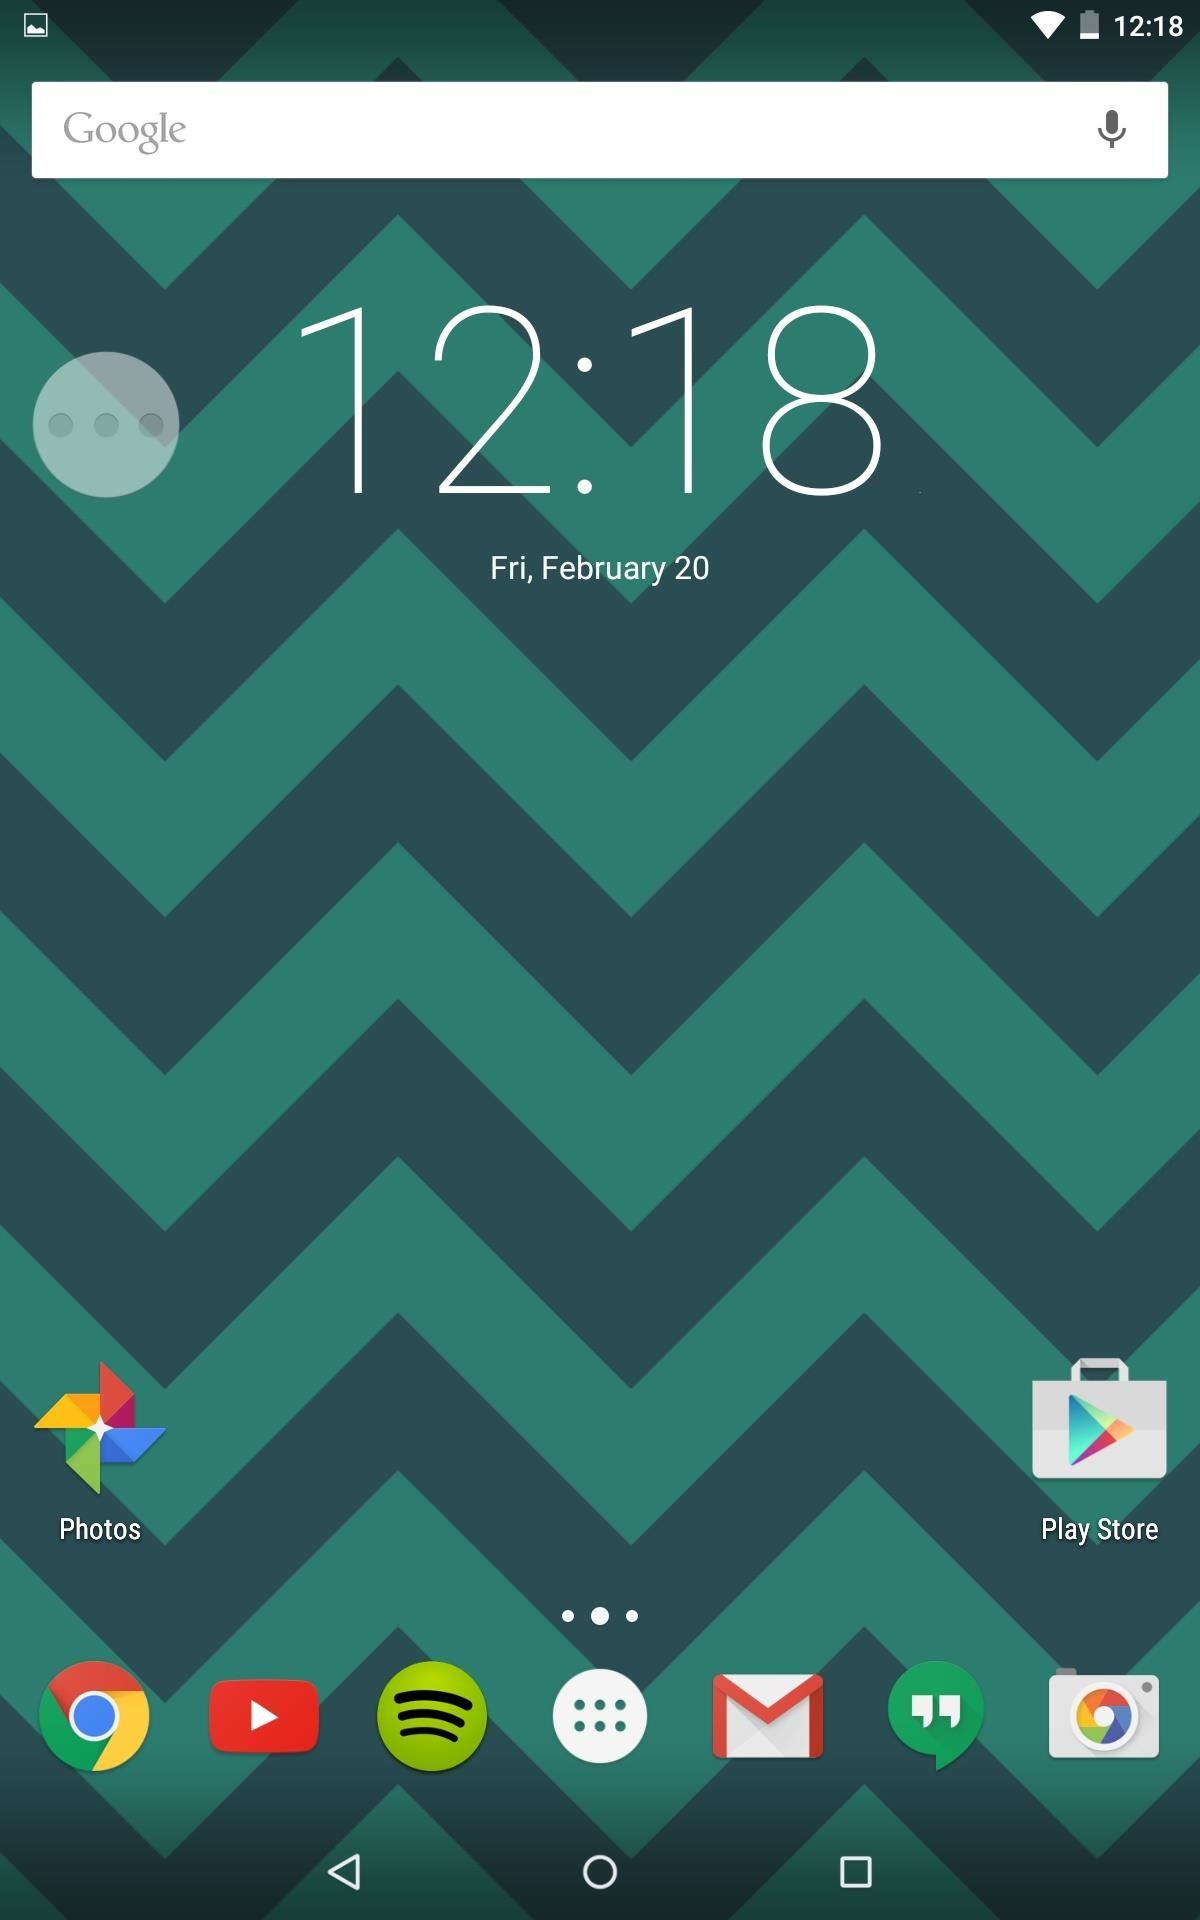 Get the Galaxy S5's Toolbox Feature on Any Android